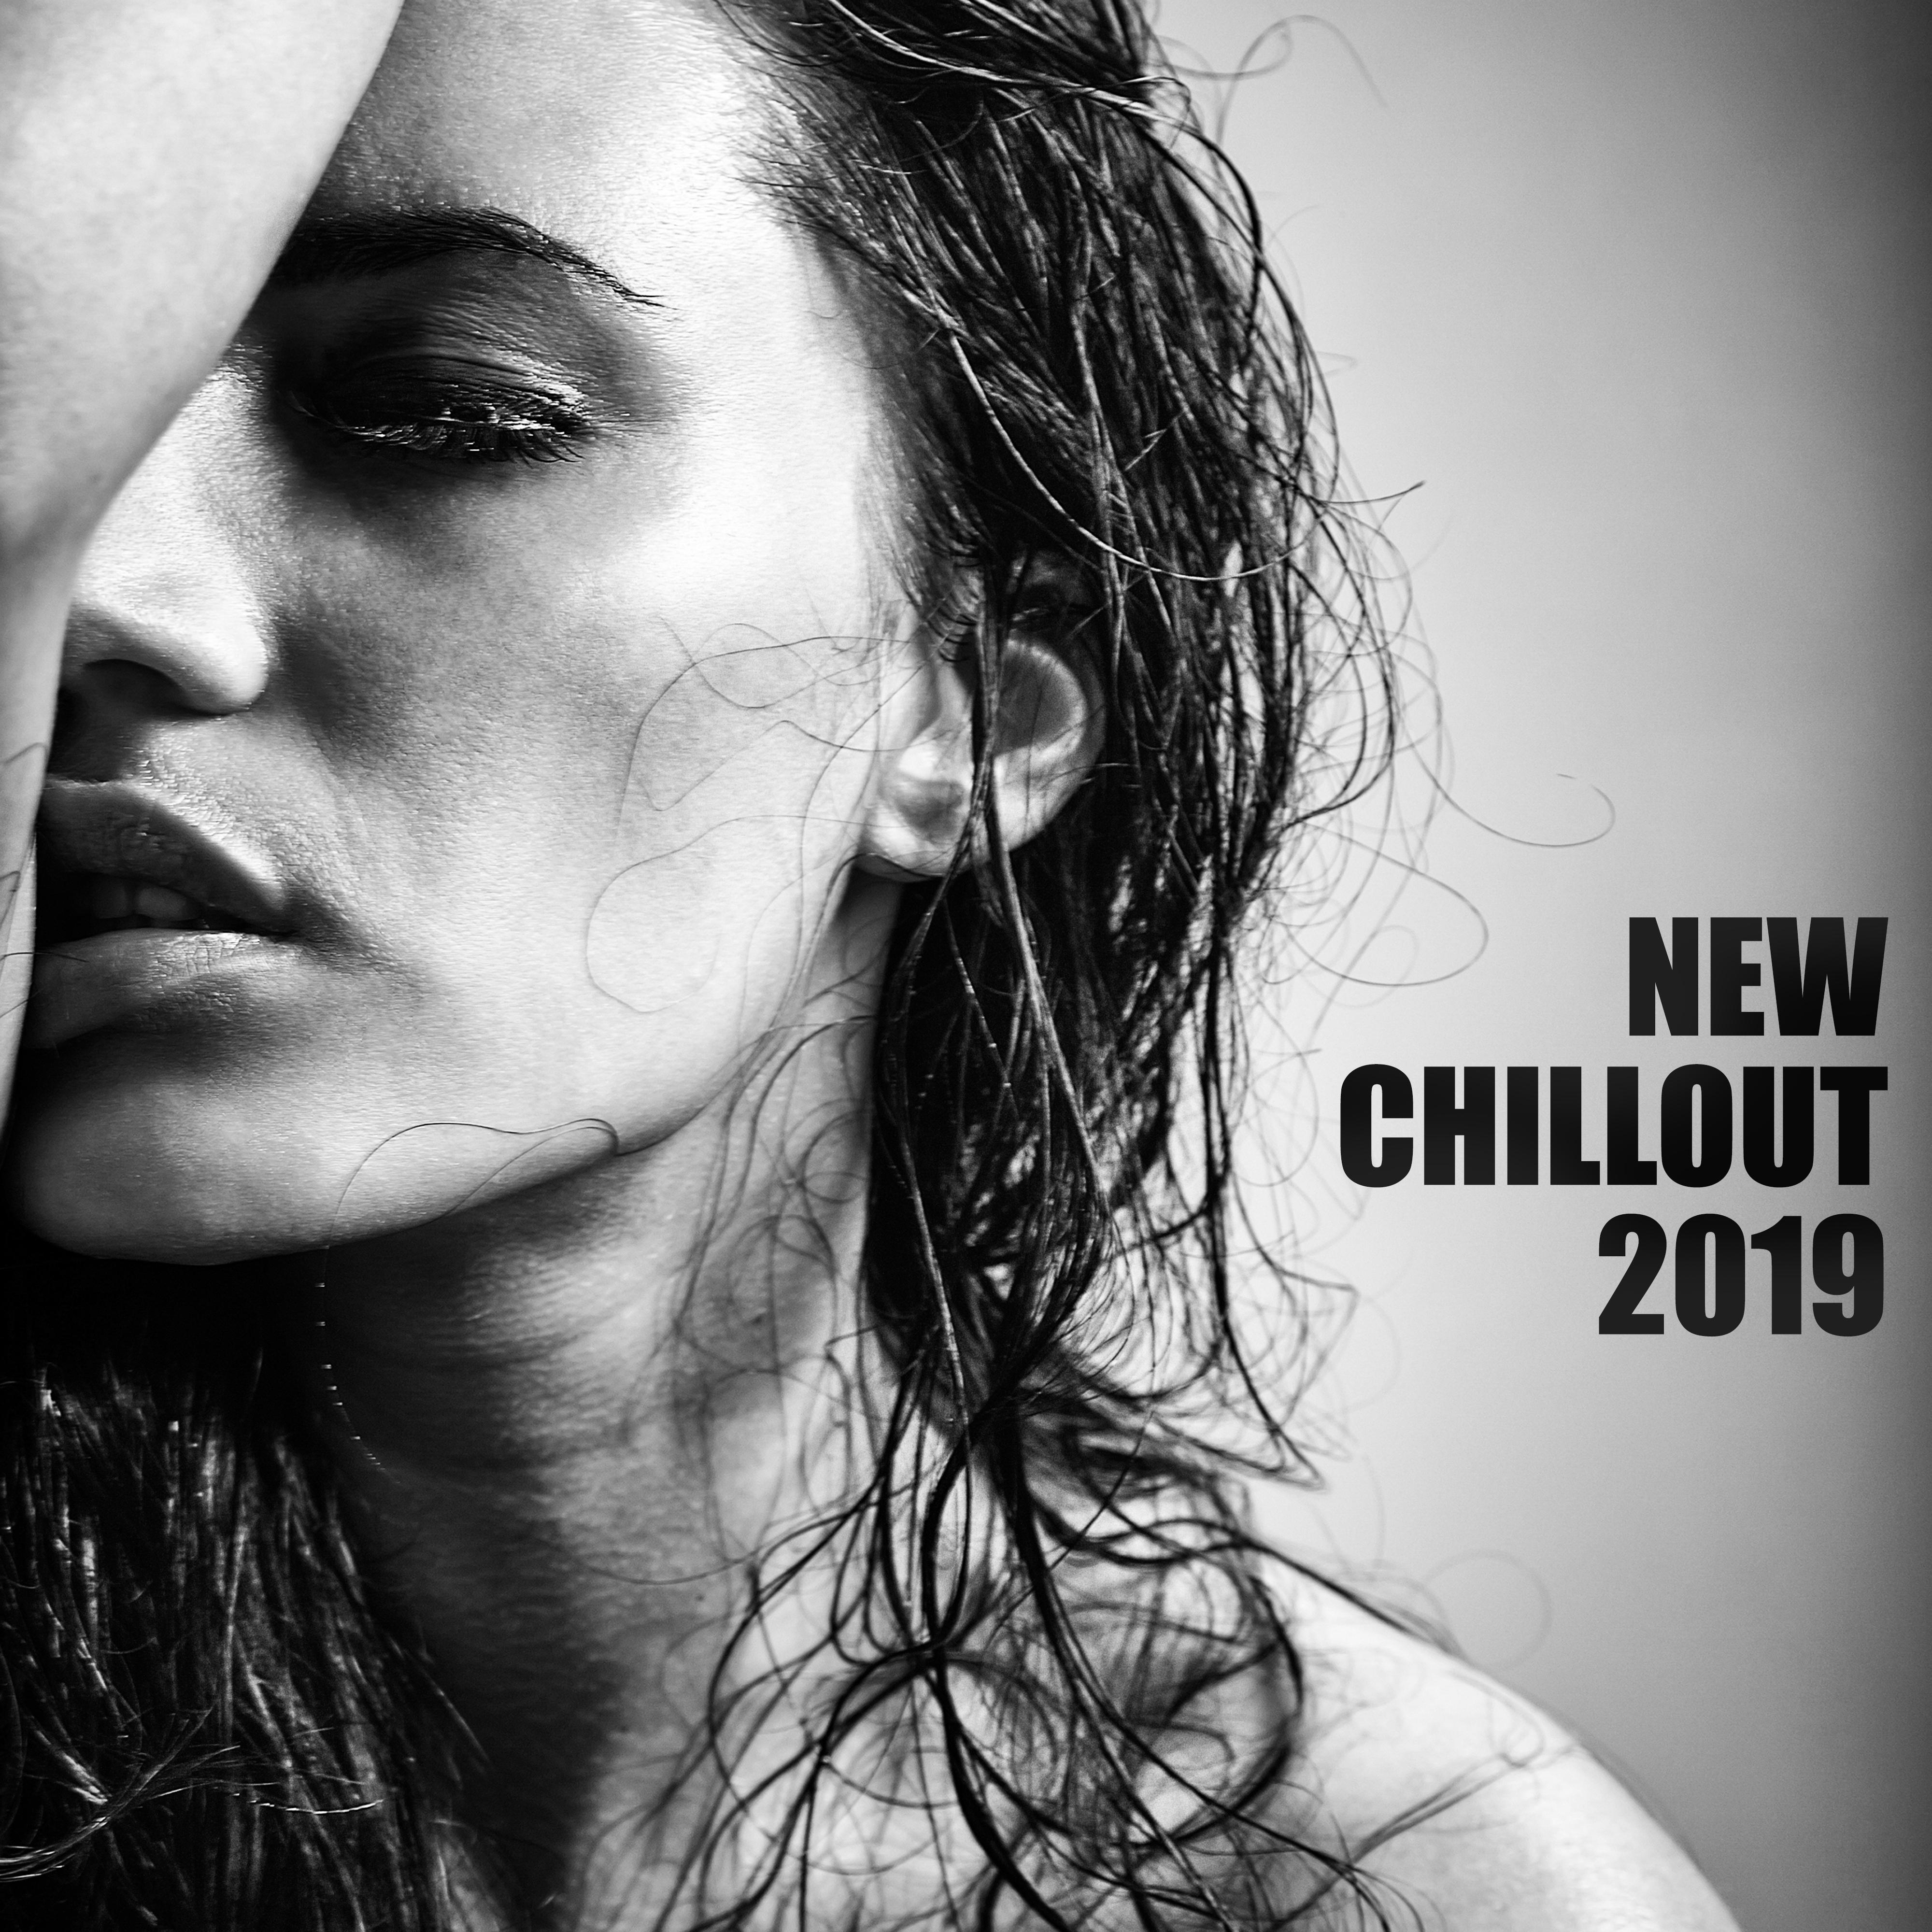 New Chillout 2019 – Chillout Hits, Deep Relax, Ibiza Chill Out, Relaxing Songs, Chillout for Reduce Stress, Fresh Music